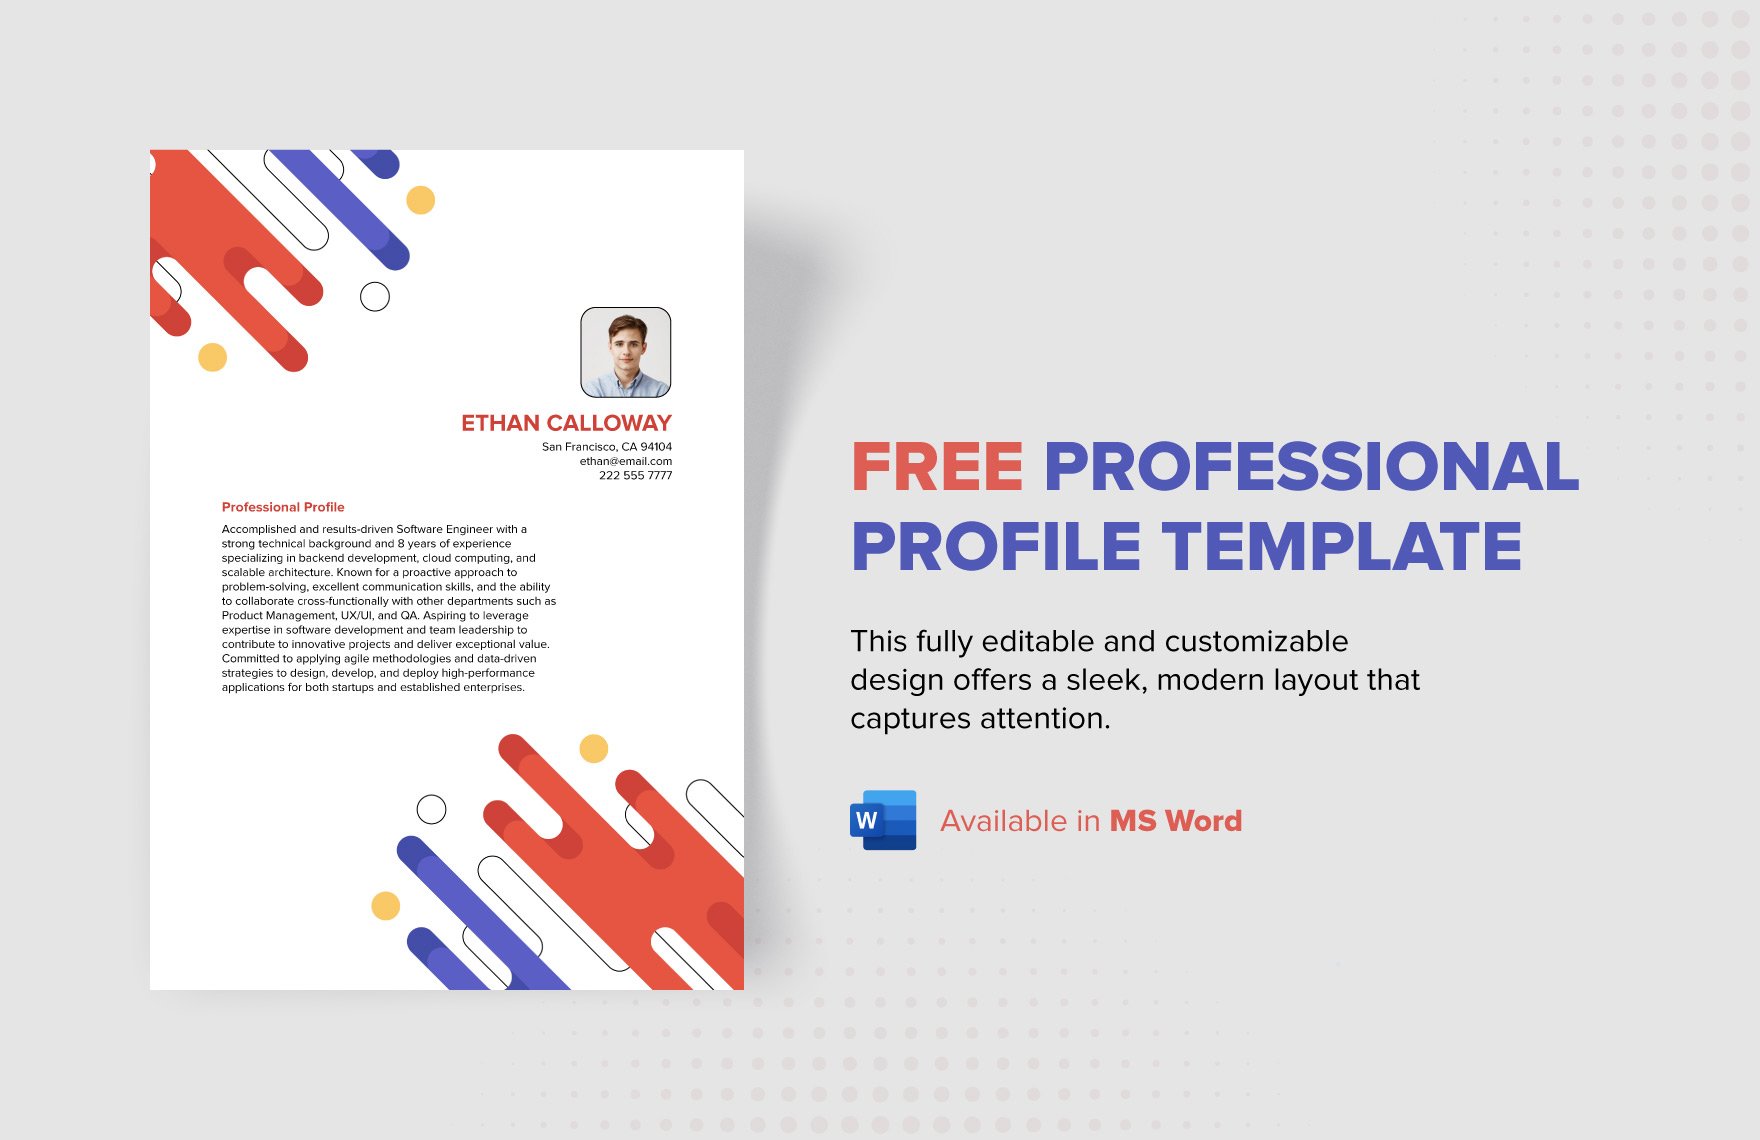 Free and customizable profile templates